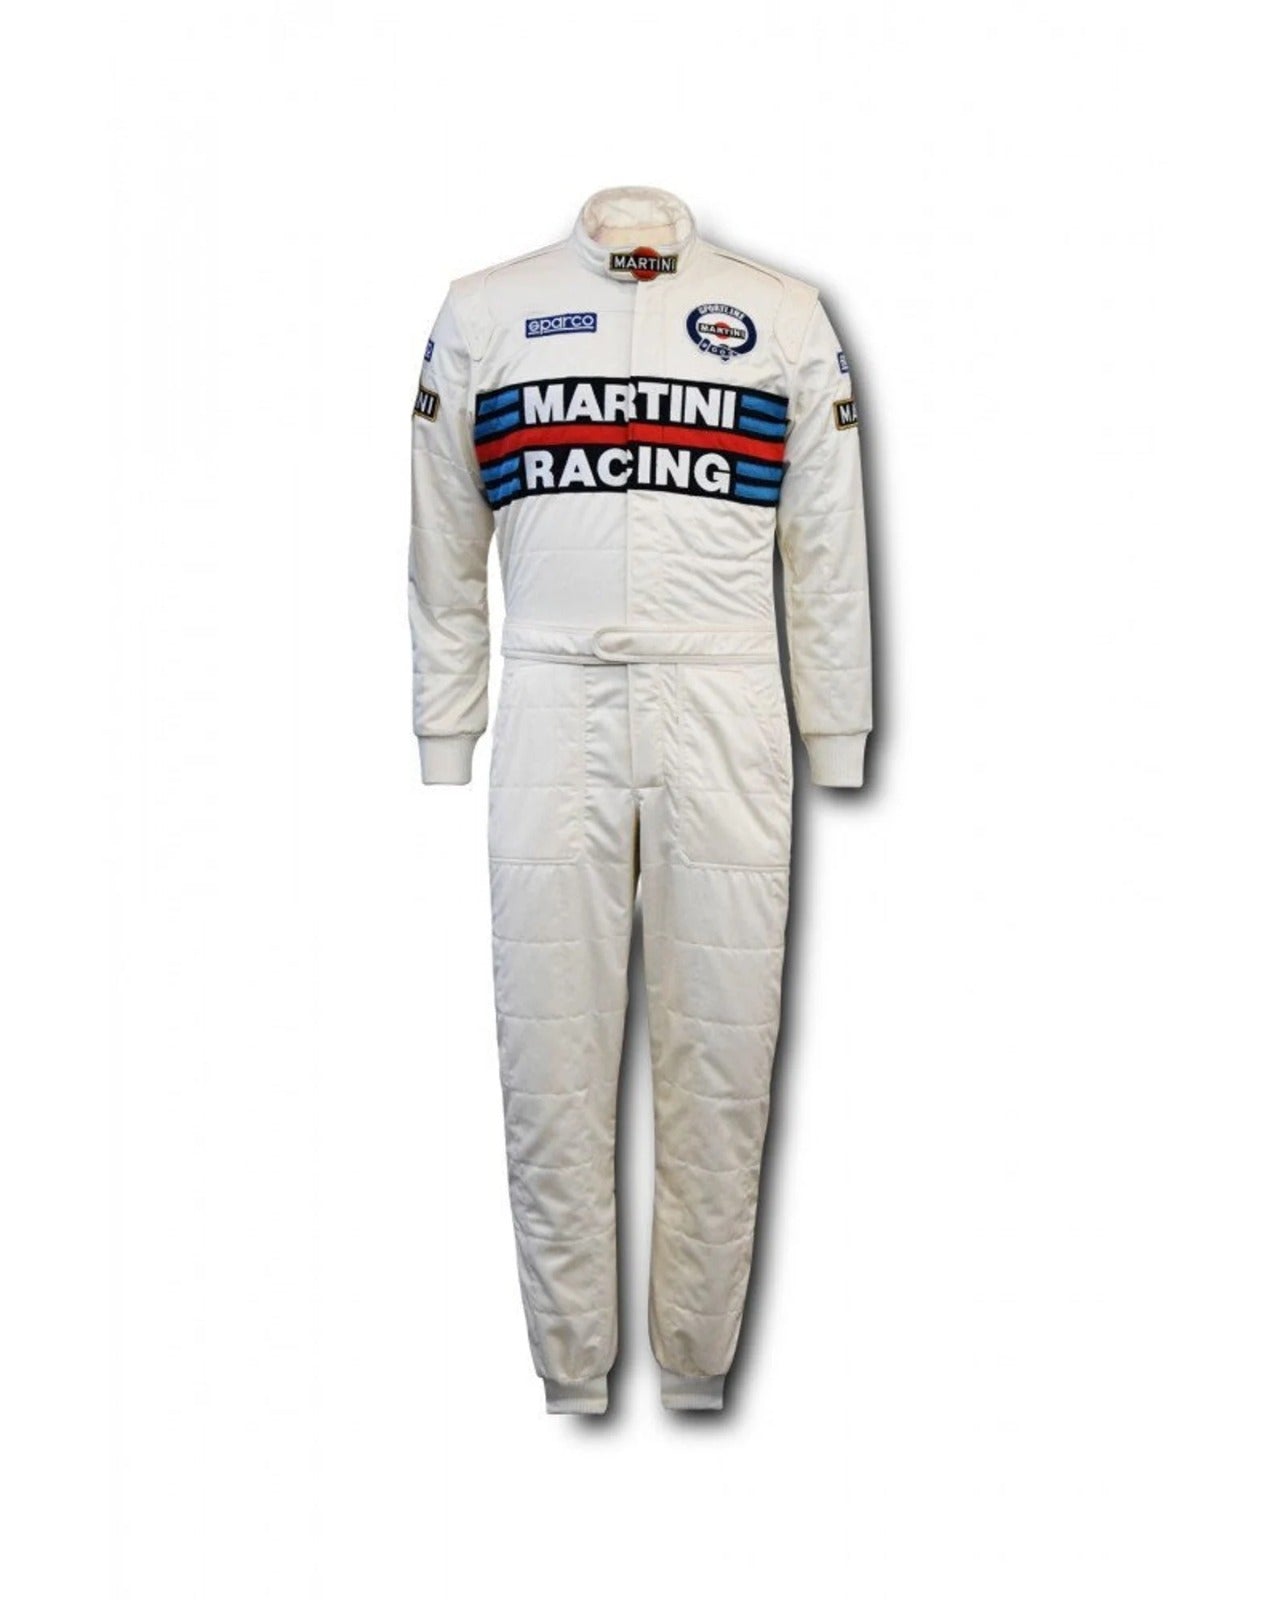 kart racing  embroidery Protective clothing Racing gear Suit N-0258